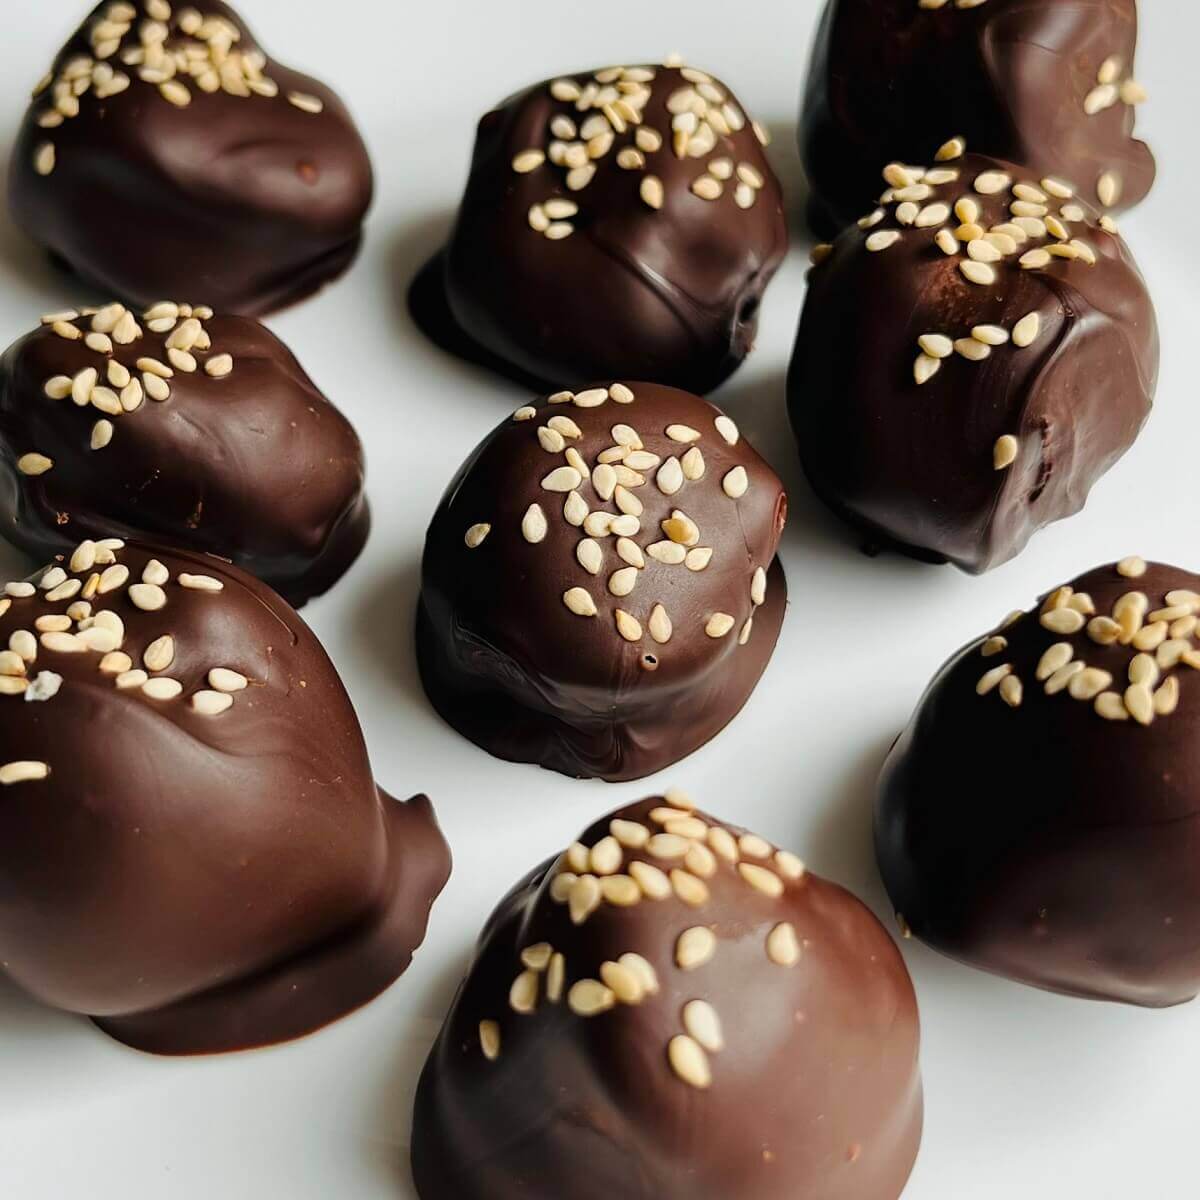 Tahini truffles sprinkled with sesame seeds on a white plate.